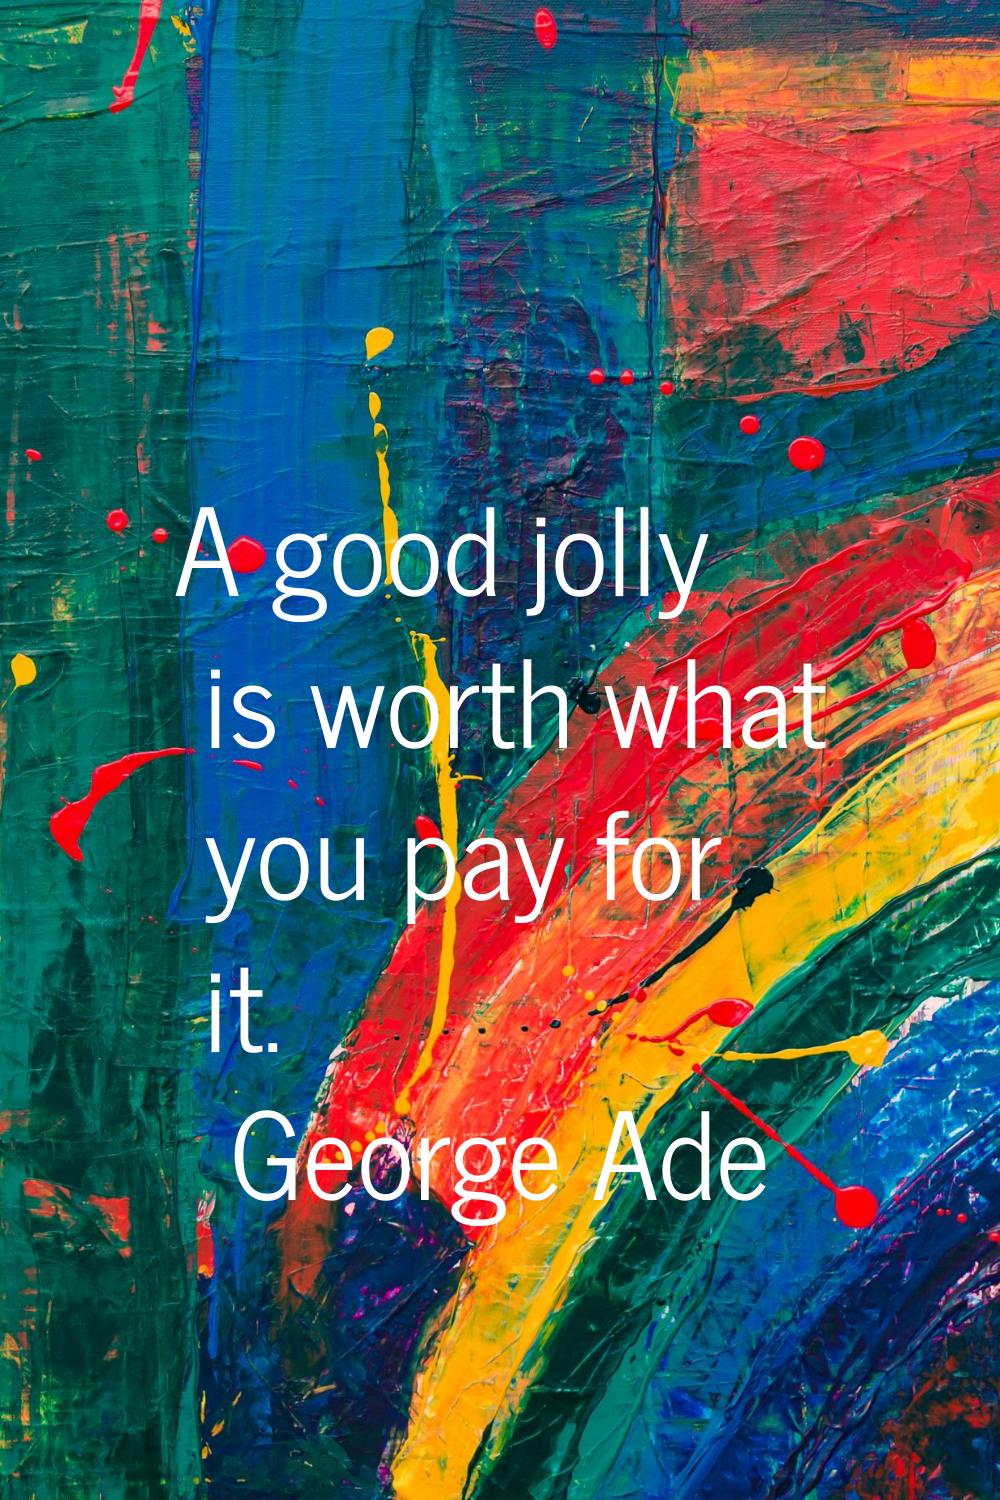 A good jolly is worth what you pay for it.